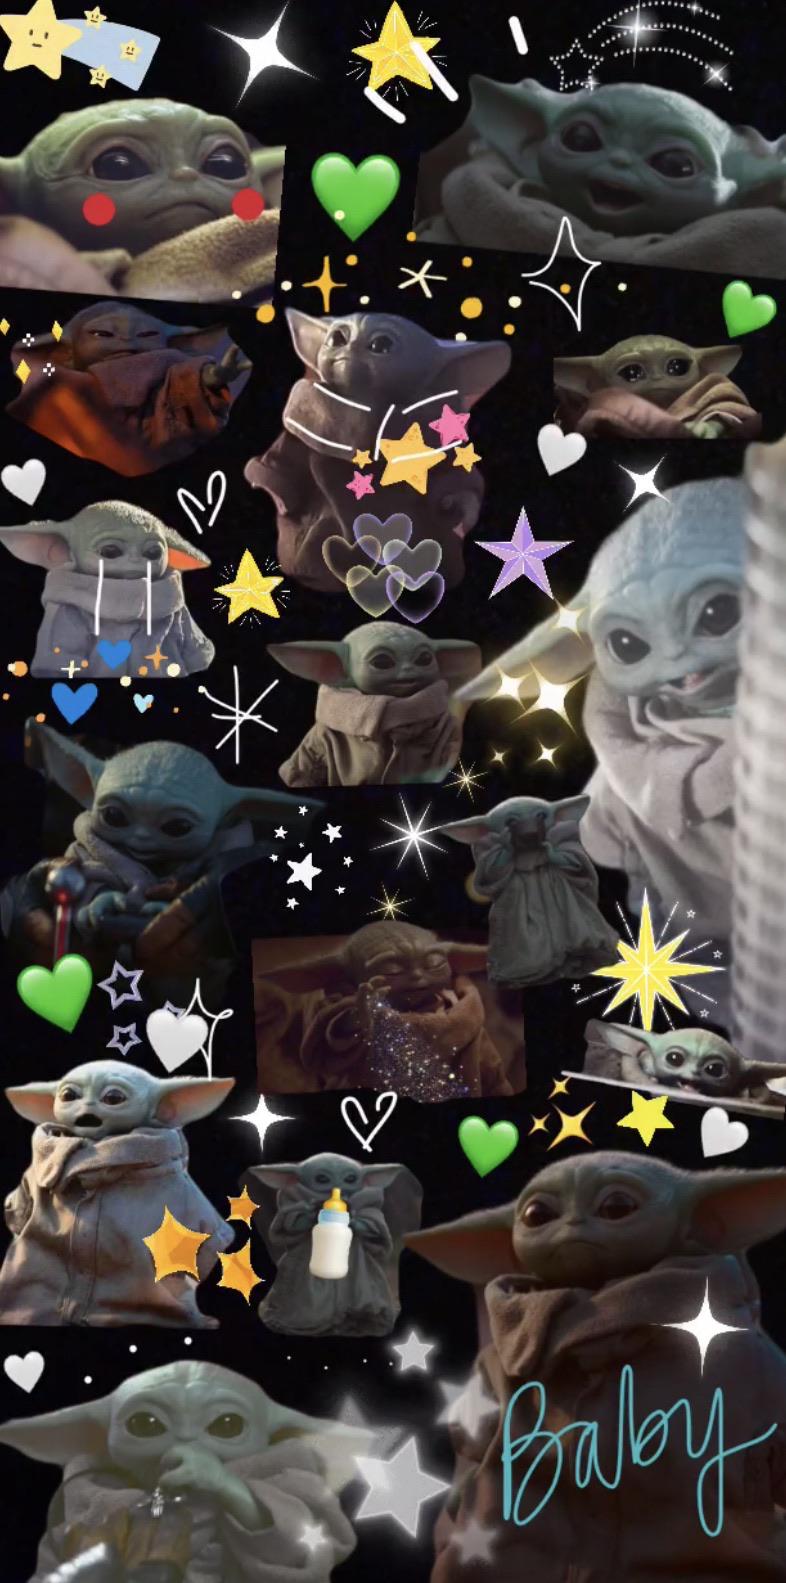 Collage of Baby Yoda images, surrounded by stars and hearts - Baby Yoda